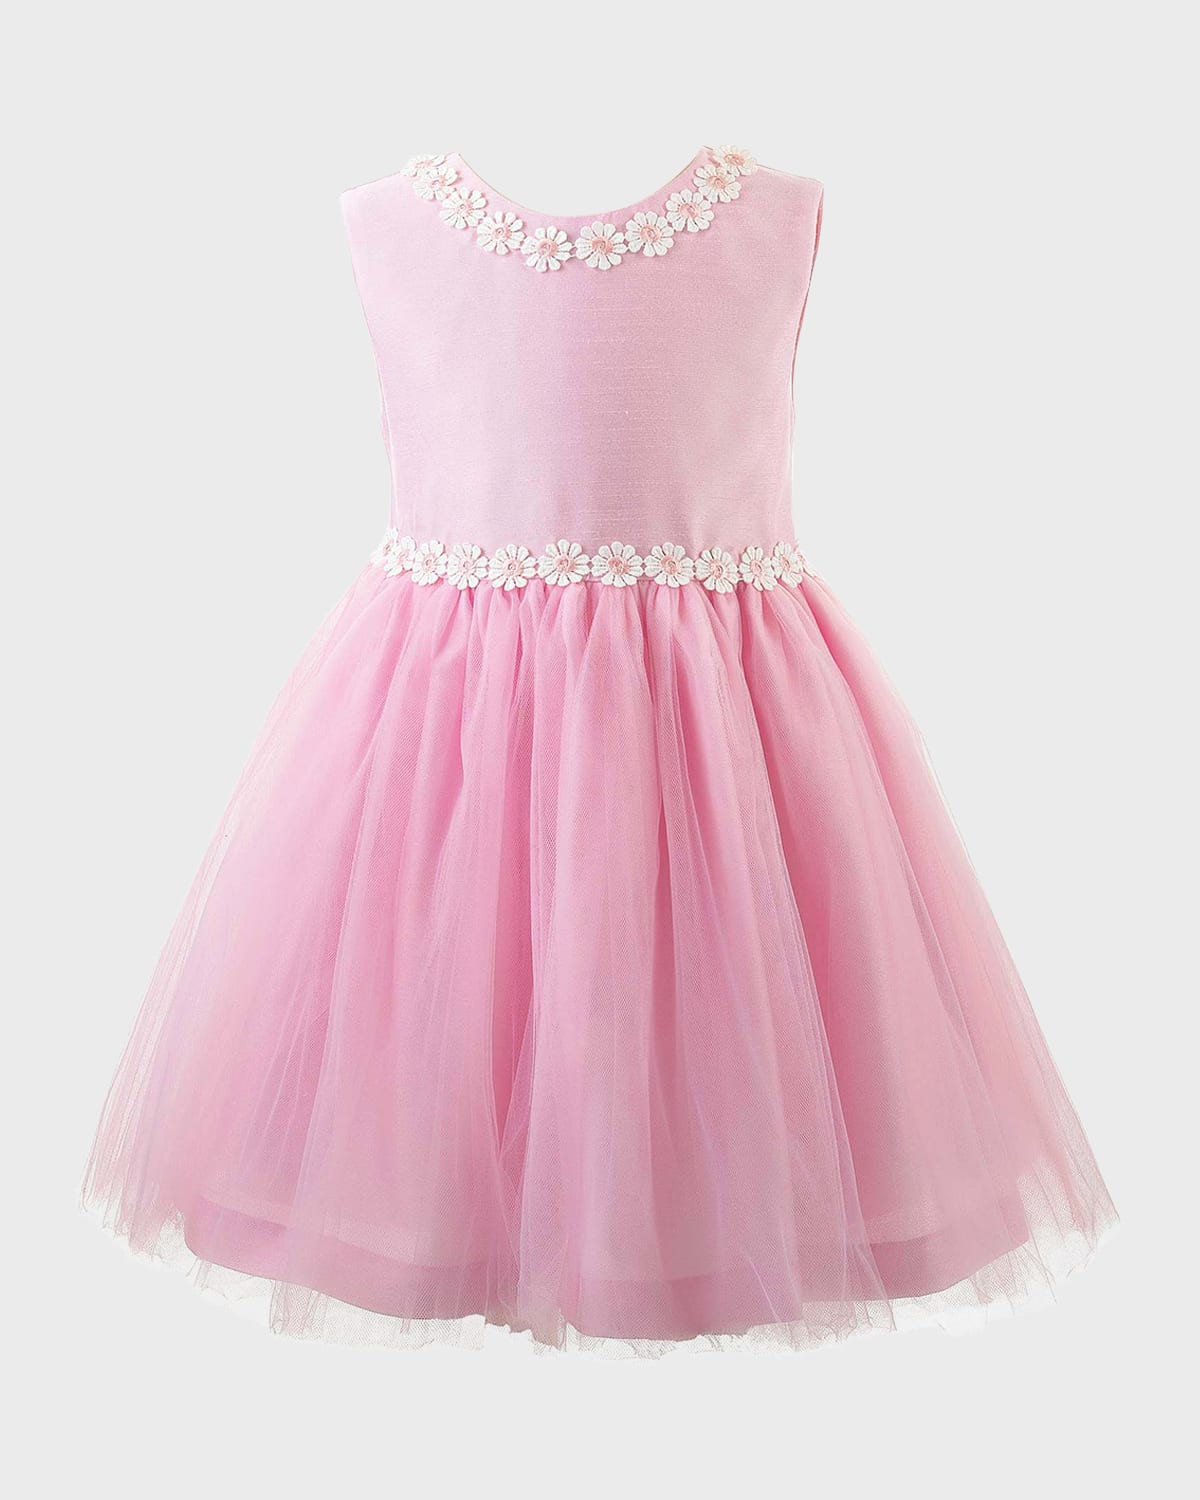 Girl's Daisy Tulle Party Dress, Size 3T-10